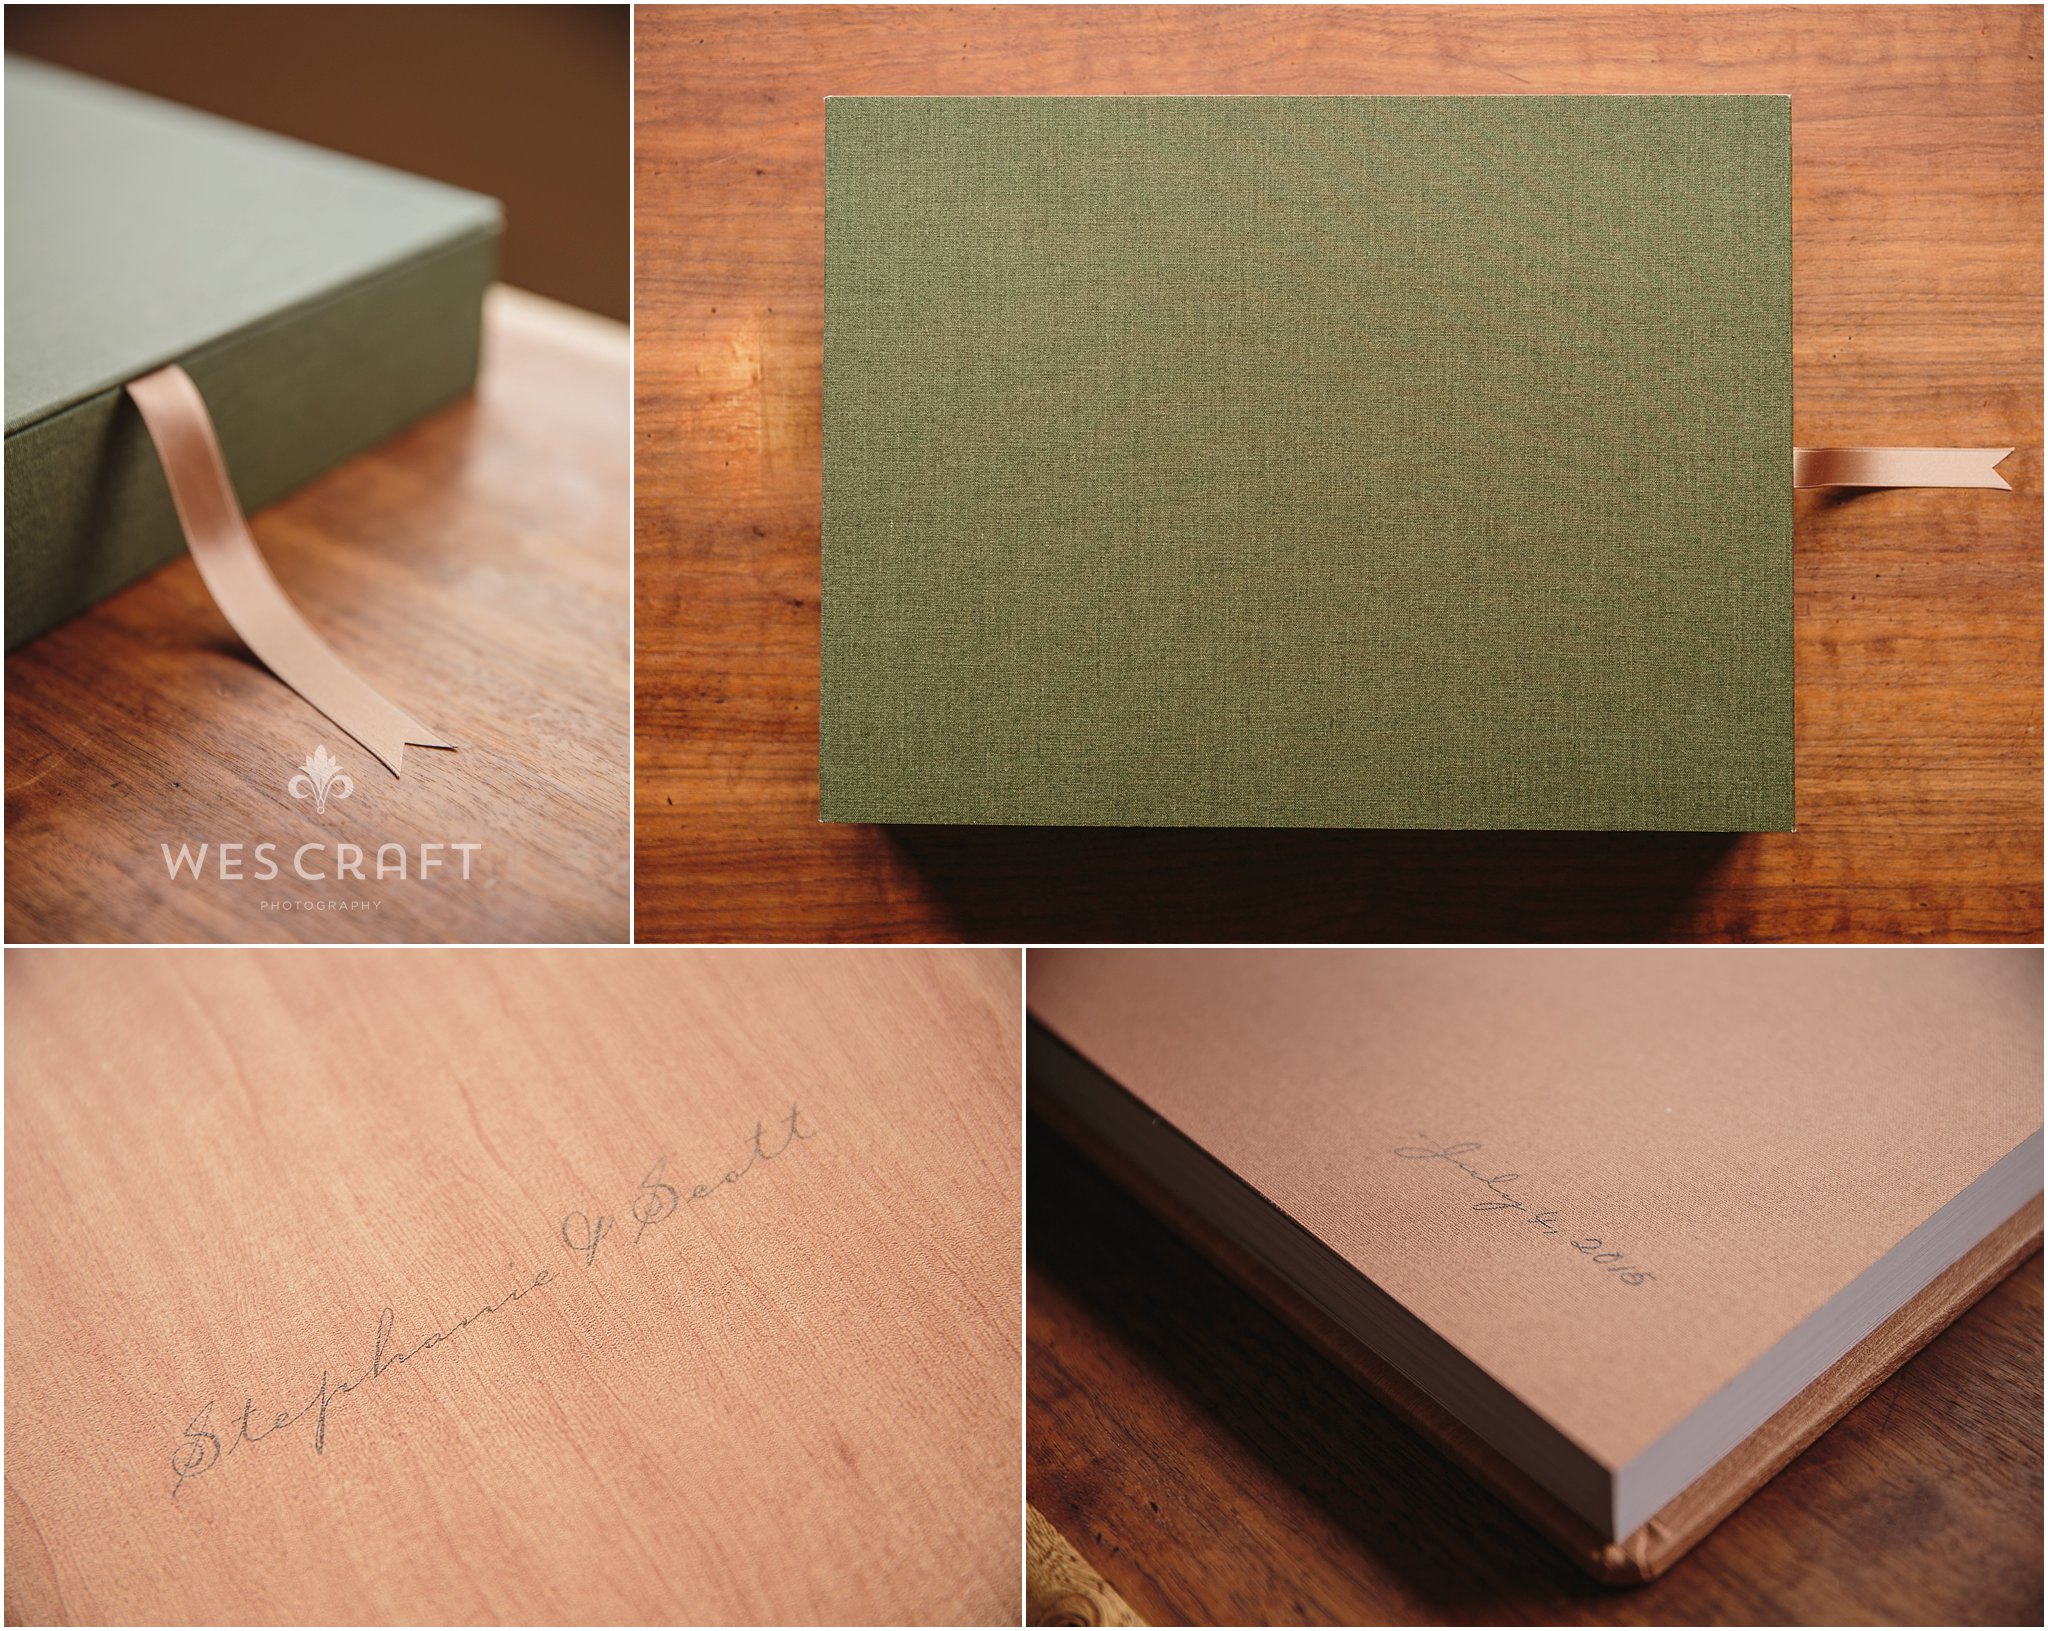 A hand chosen ribbon lifts your album out of it's custom made linen box. We chose moss green for this wooded themed wedding. The cover titles are overprinted in a Carpenter script on the Maple cover. 